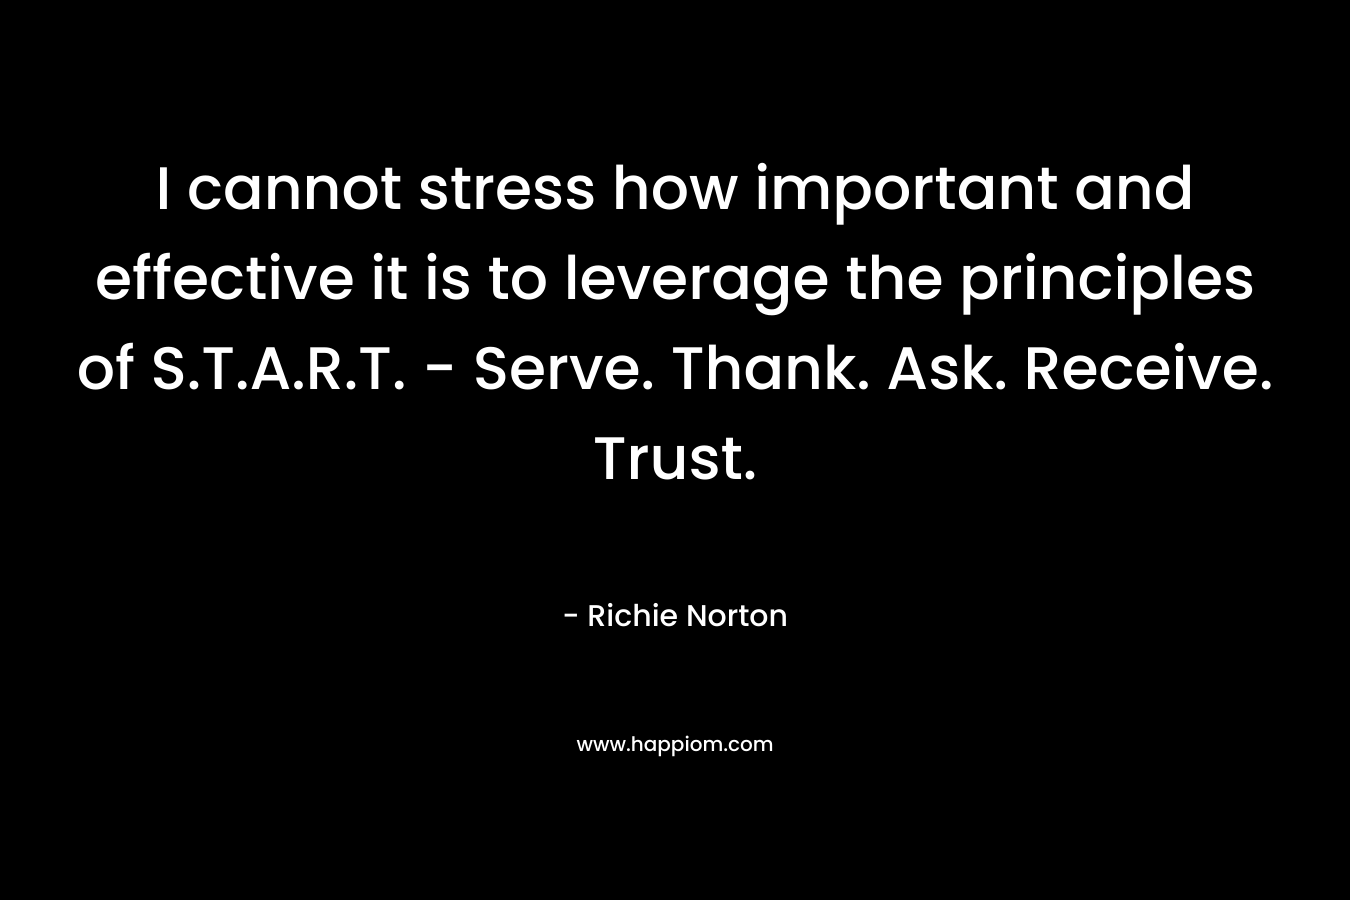 I cannot stress how important and effective it is to leverage the principles of S.T.A.R.T. - Serve. Thank. Ask. Receive. Trust.